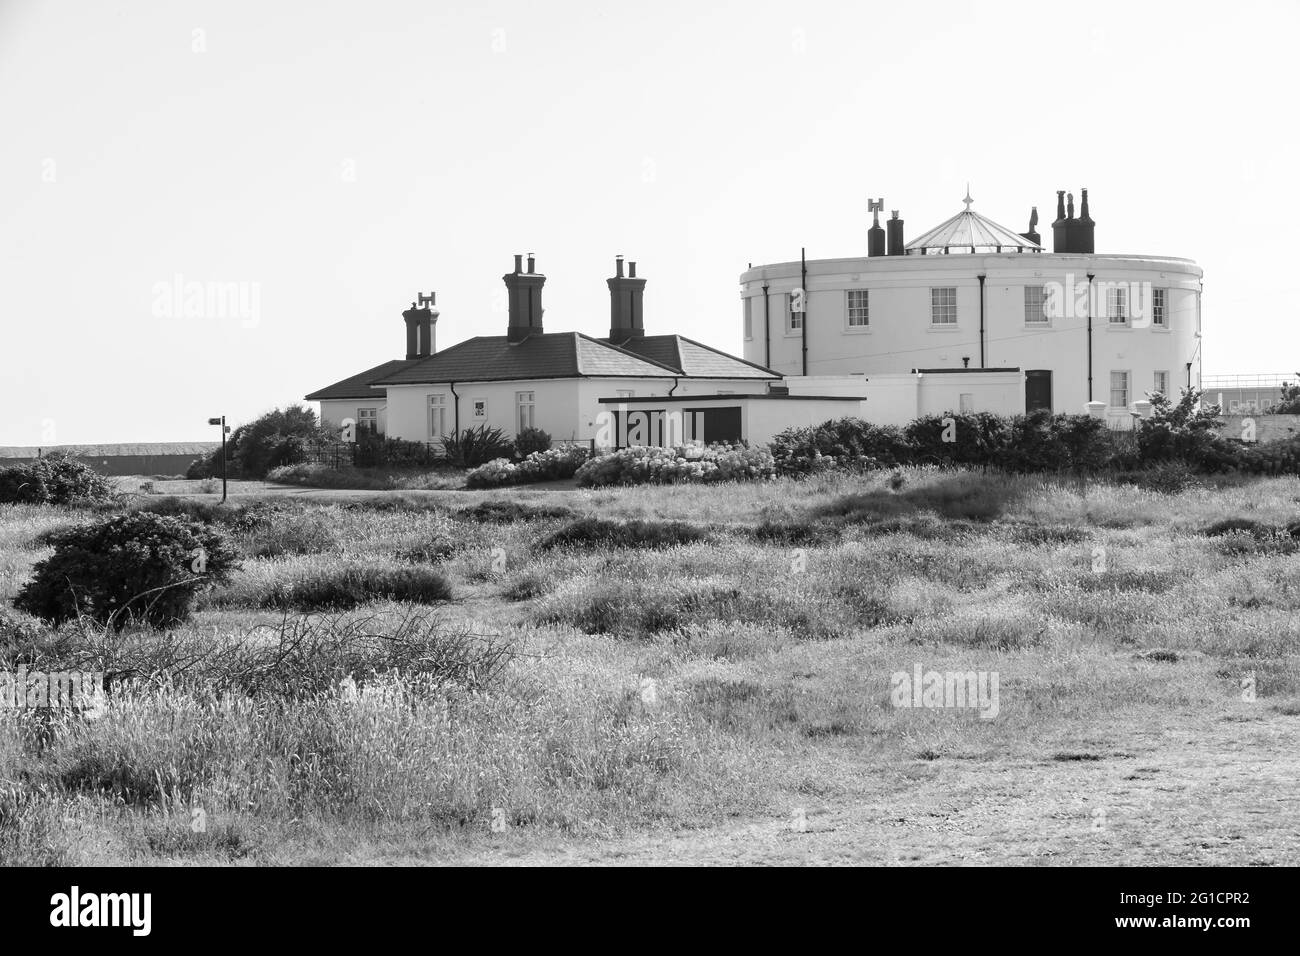 Near the old Lighthouse at Dungeness, Kent, England, UK. Stock Photo